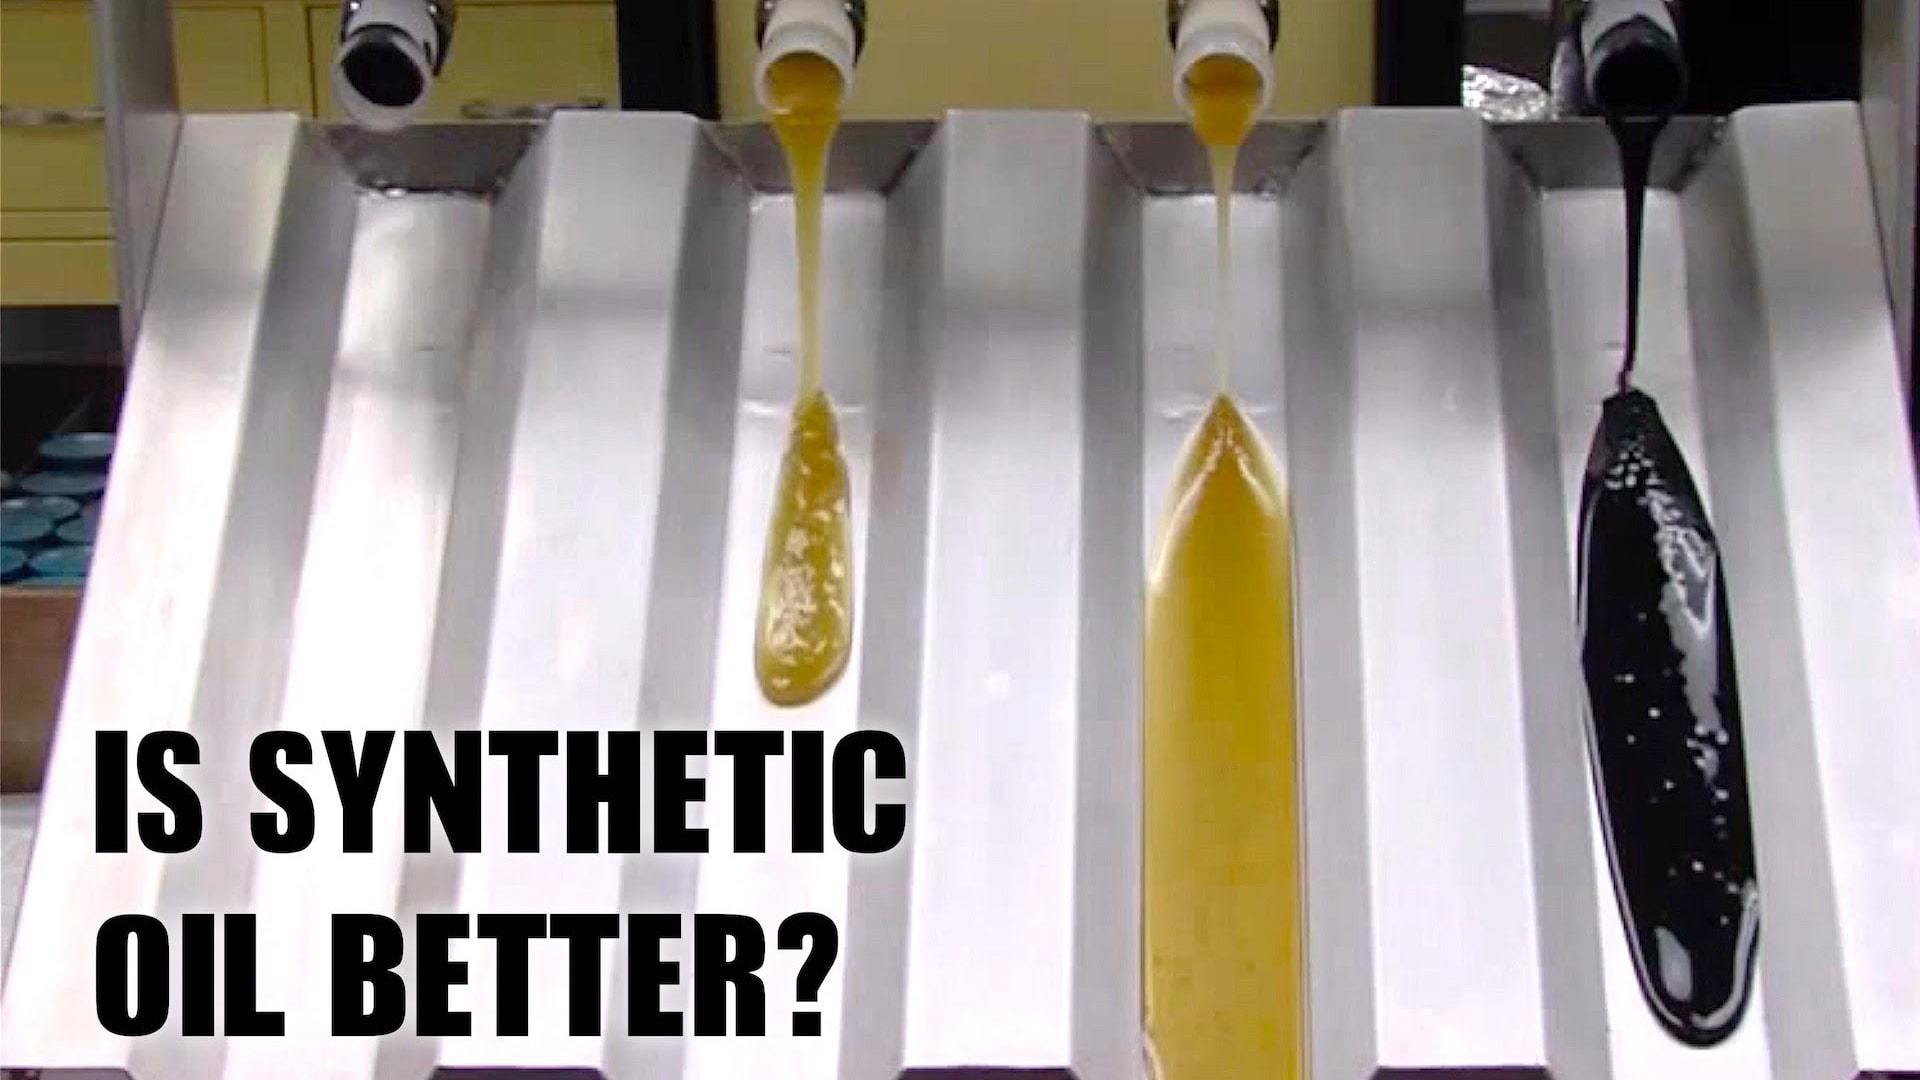 Is synthetic engine oil better than conventional for your car?